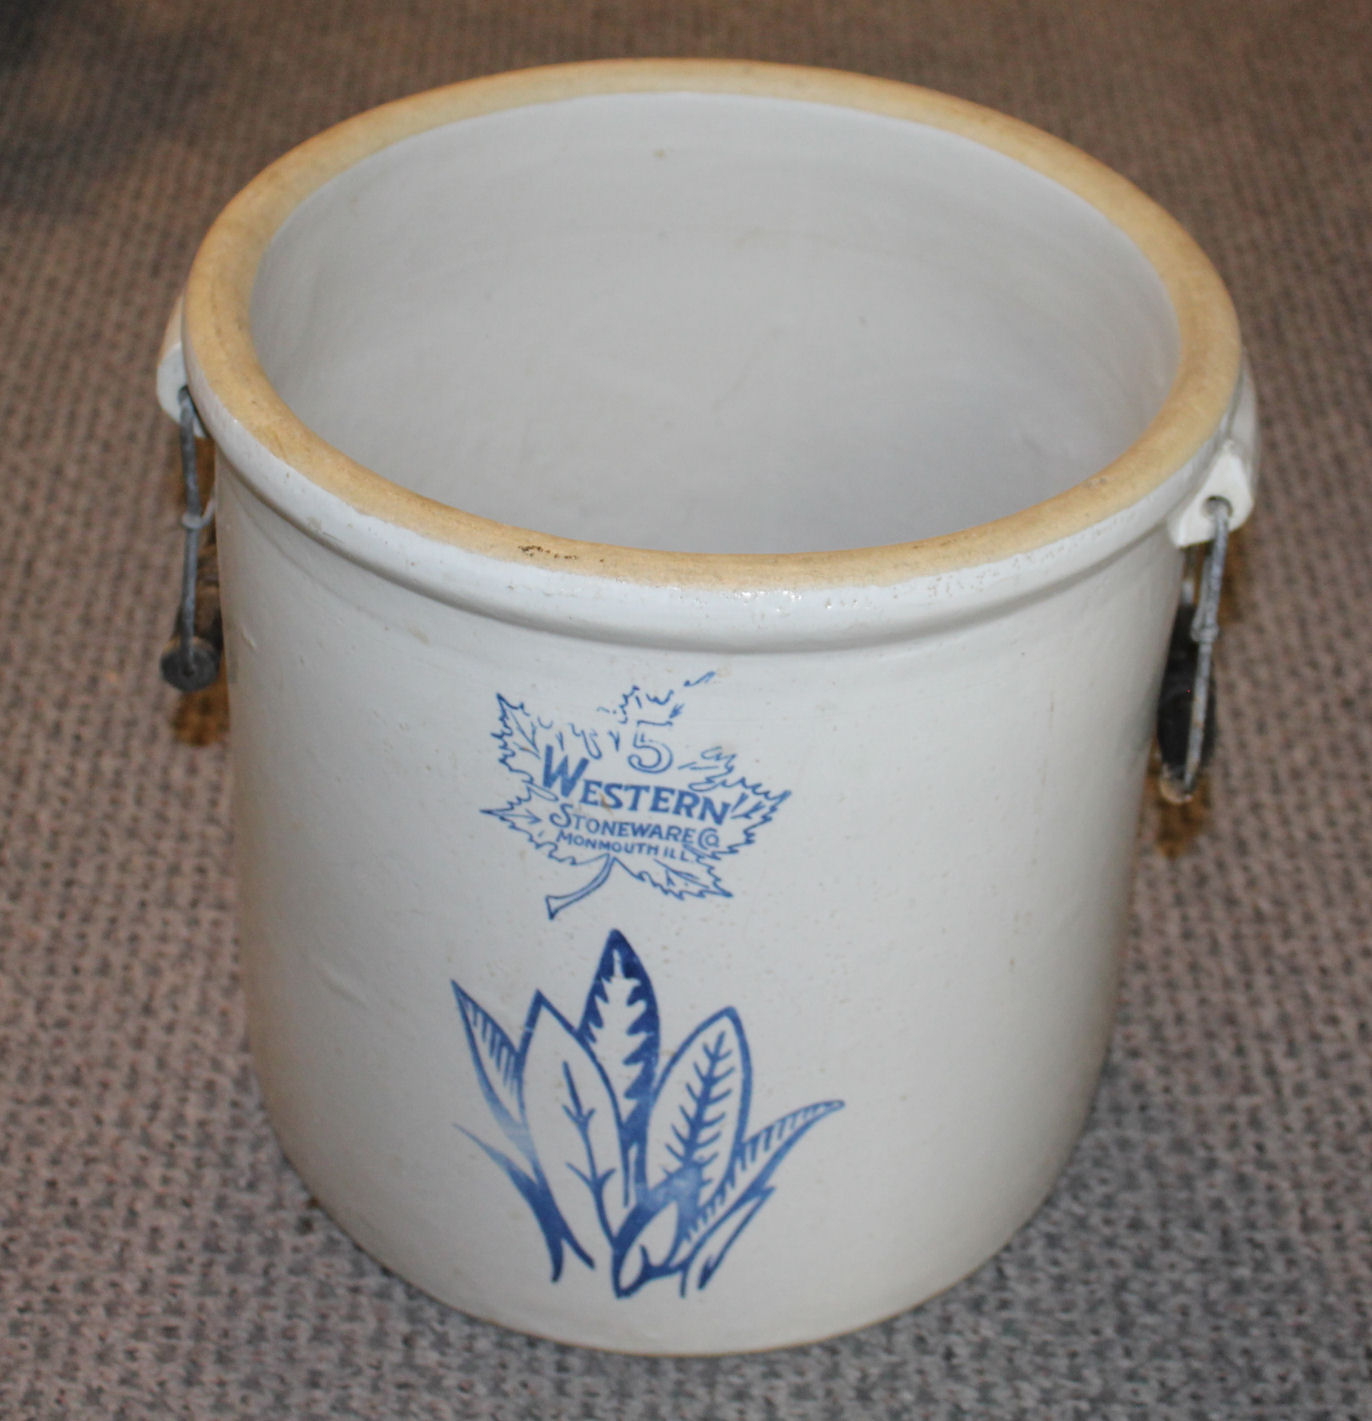 Stoneware Crock with Handles - 5 gallon Western Stoneware Company Monmouth,...